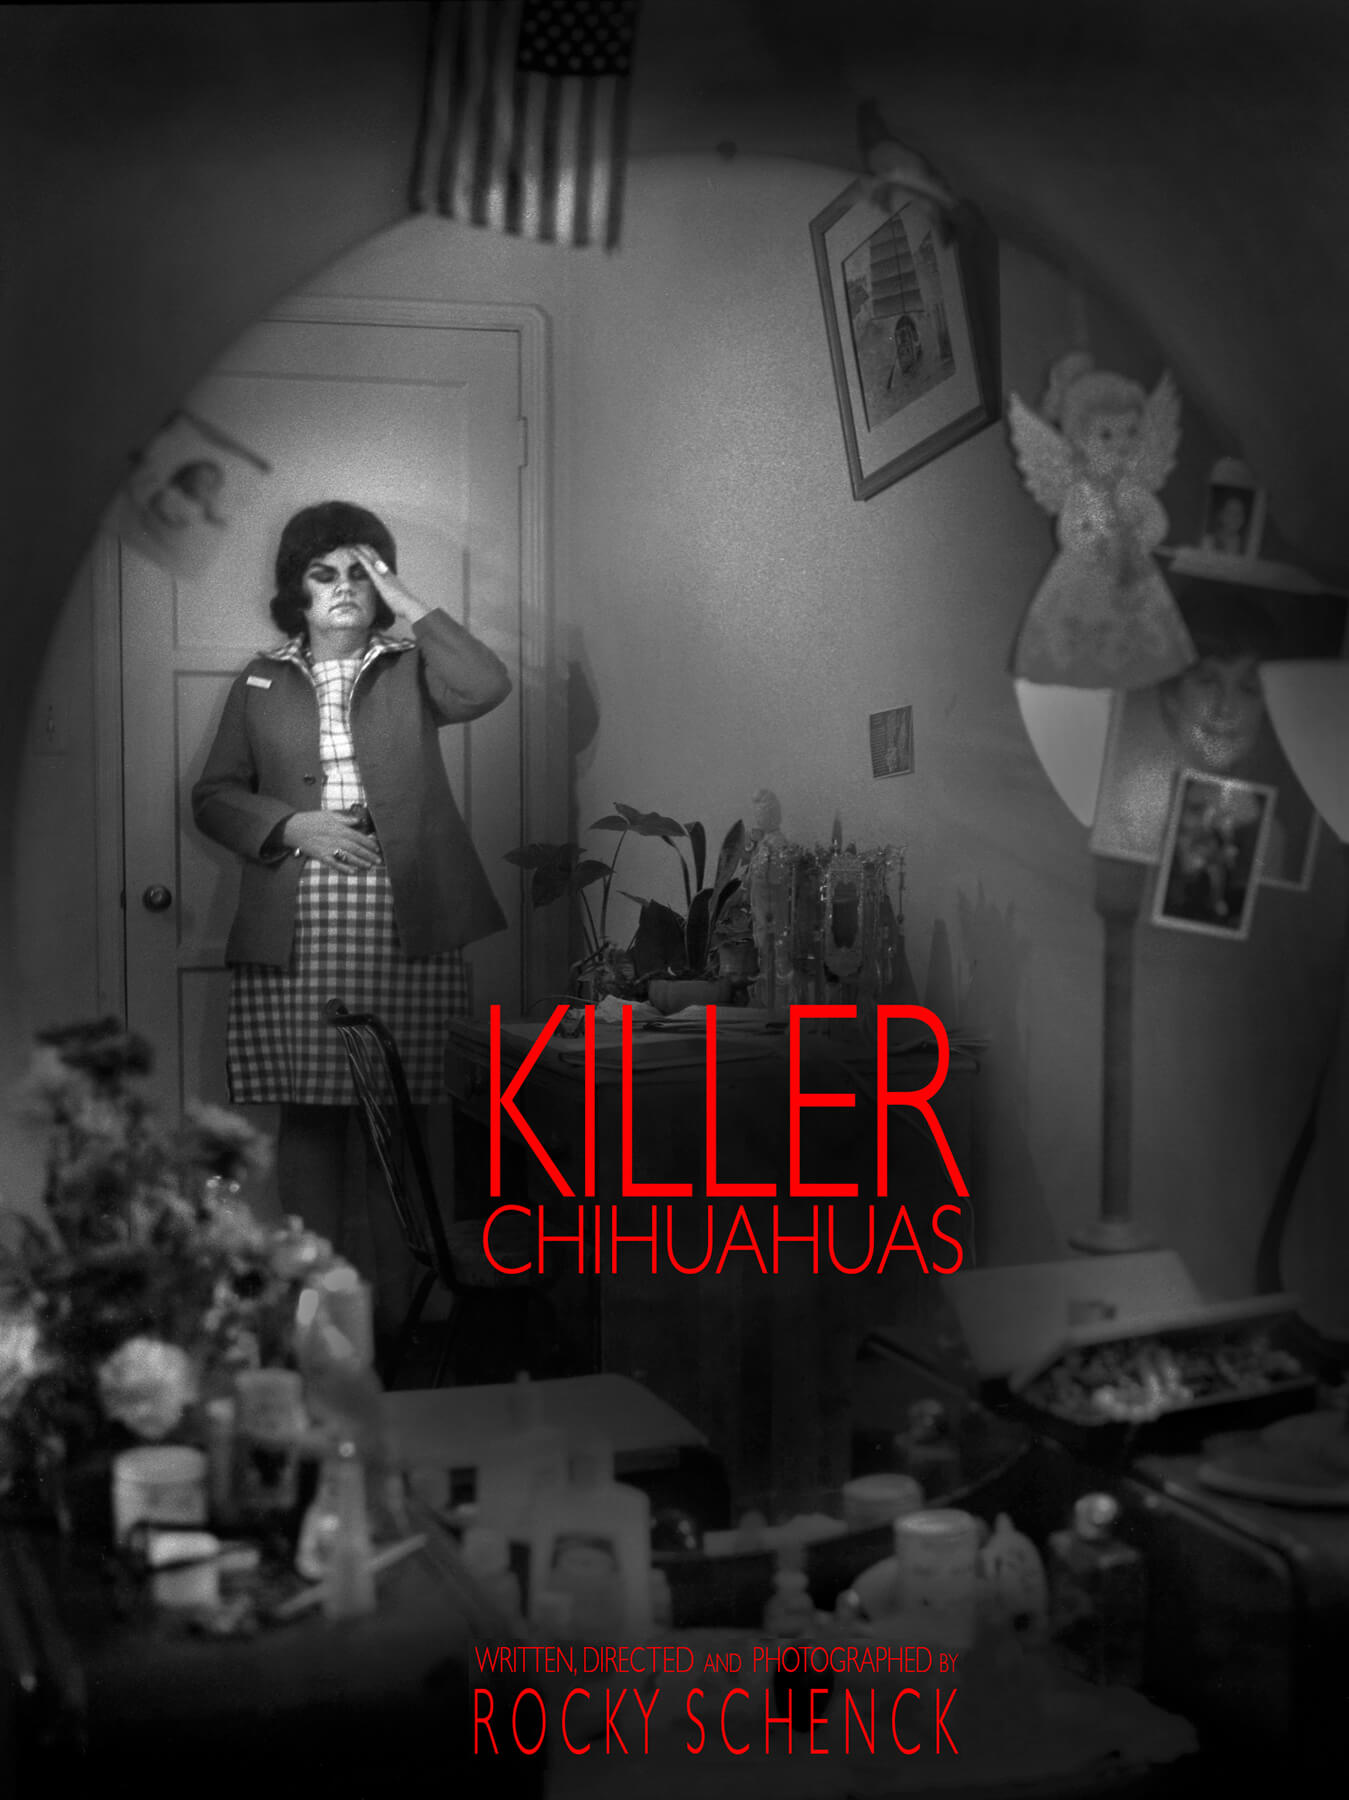 Killer Chihuahuas, a short film  written, directed, and photographed by Rocky Schenck.  Starring Kathleen Osmon and Debbie Salinger.